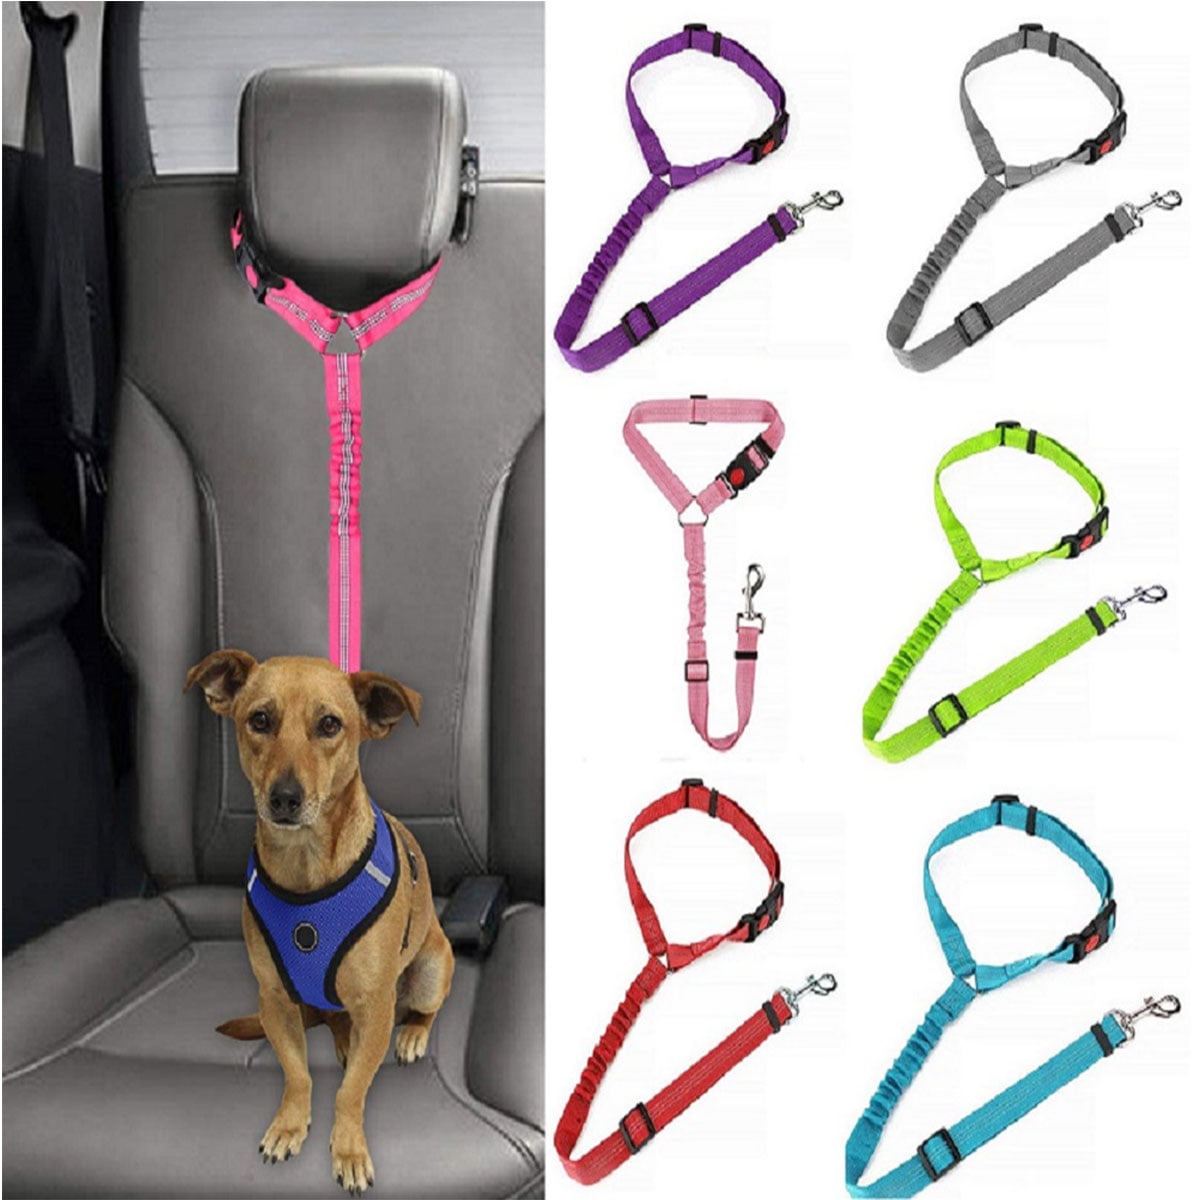 Single or Double Pack Car Safety Seat Belt Harness Leash Travel for Pet Dog Cat